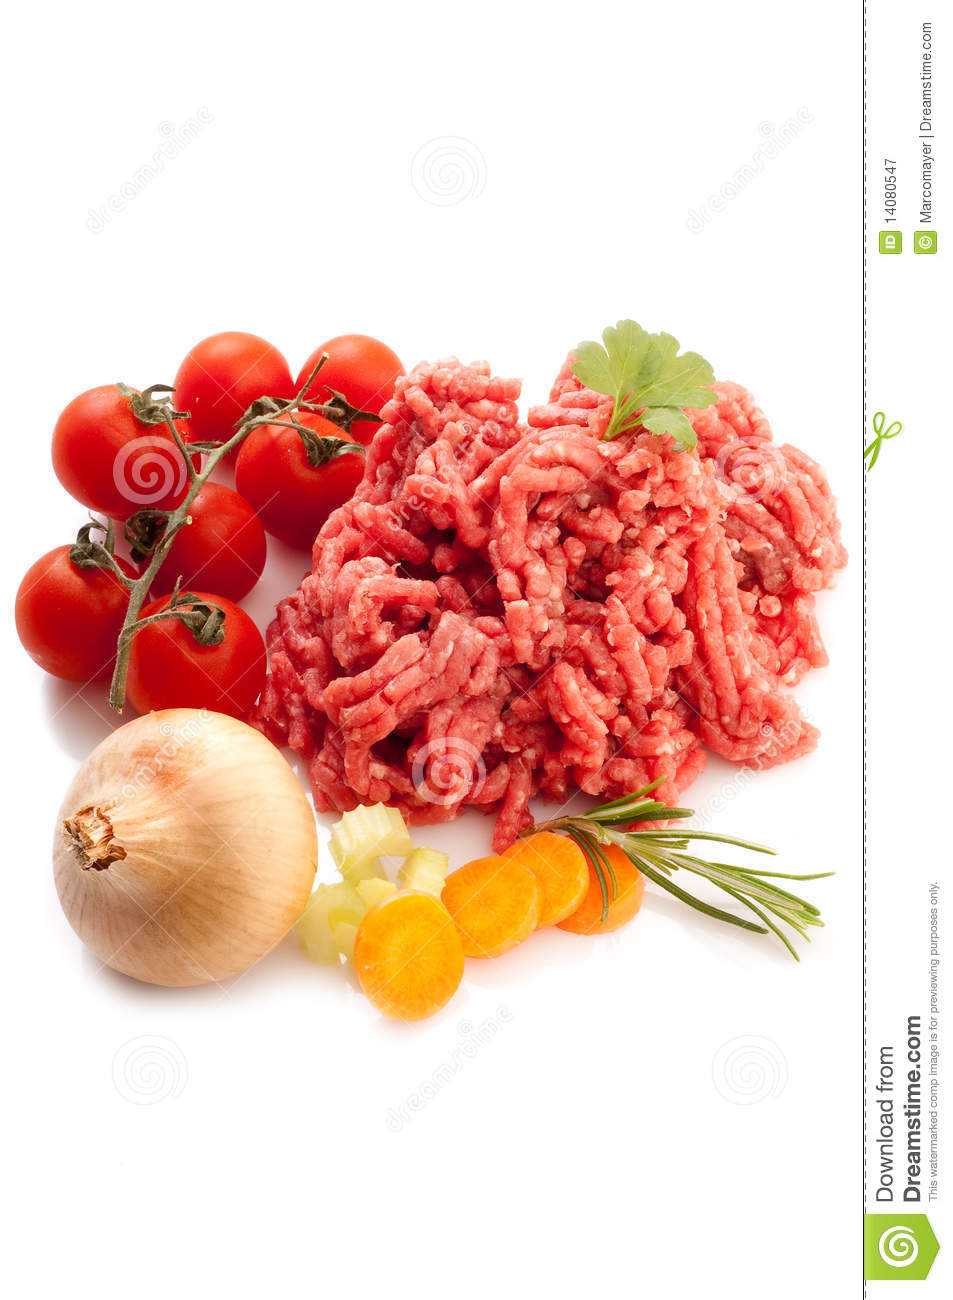 Meat Loaf With Ingredients Royalty Free Stock Photography   Image